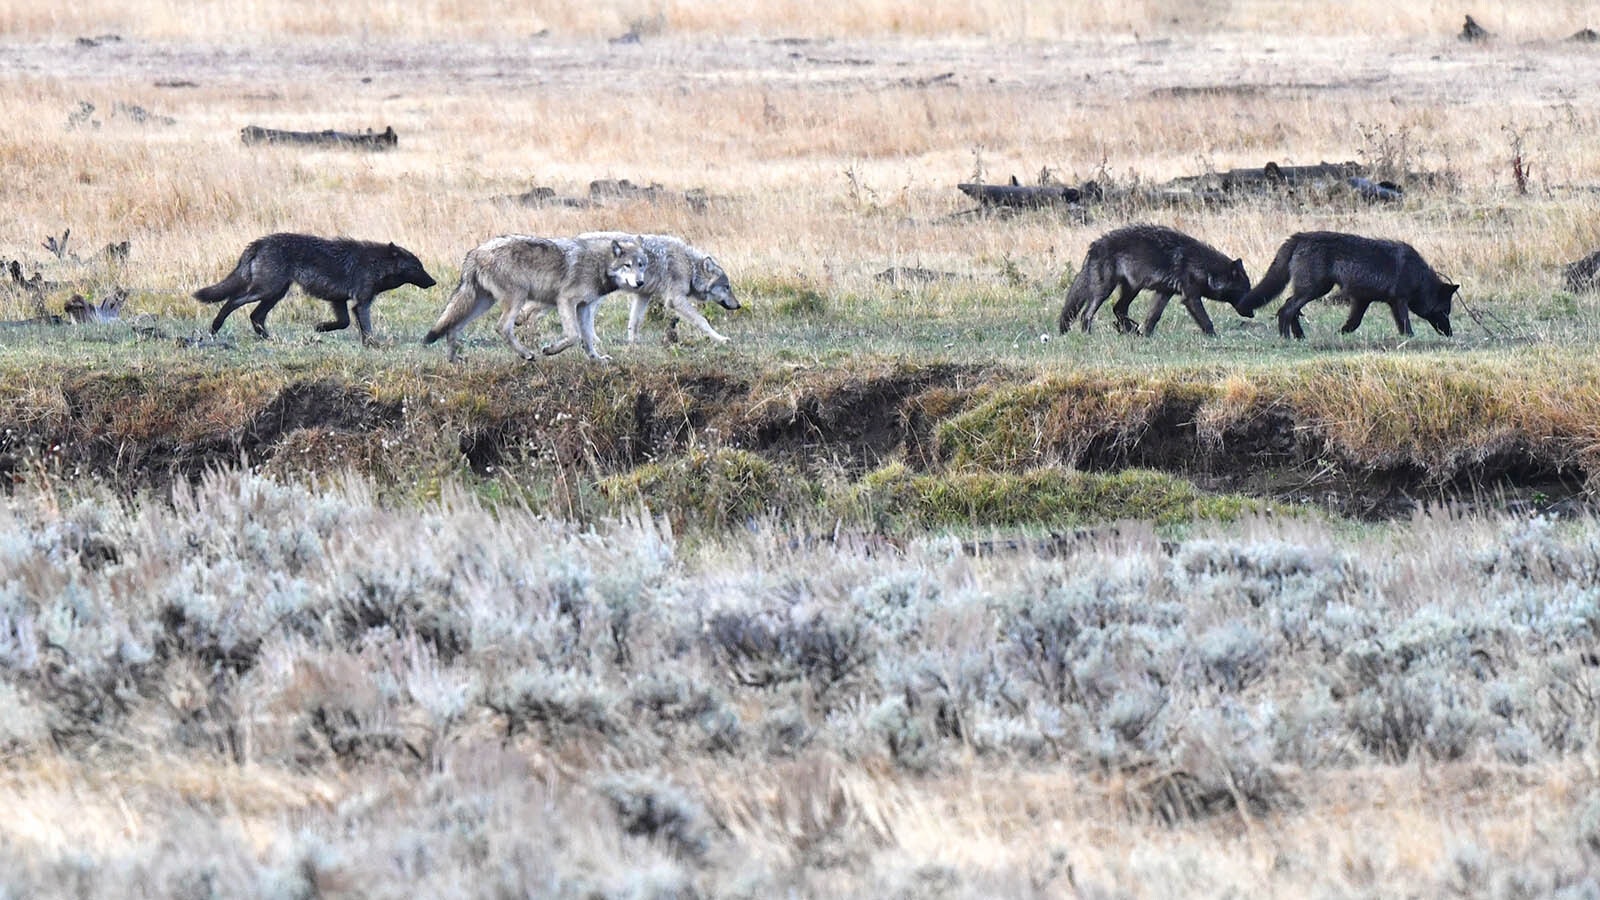 A pack of wolves in Yellowstone National Park.